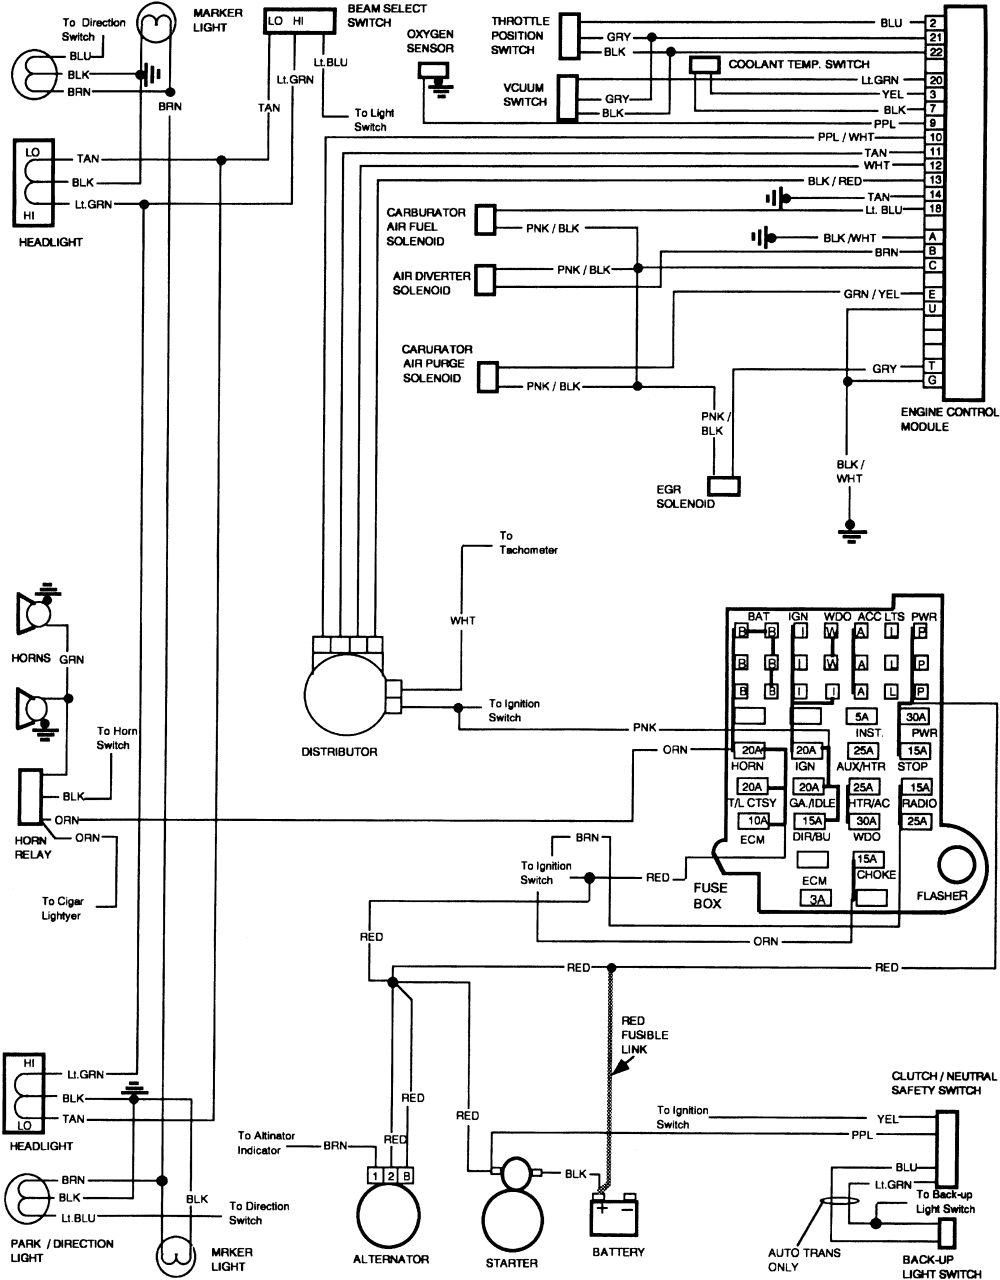 93 Cadillac Bose Wiring Schematic from 4.bp.blogspot.com